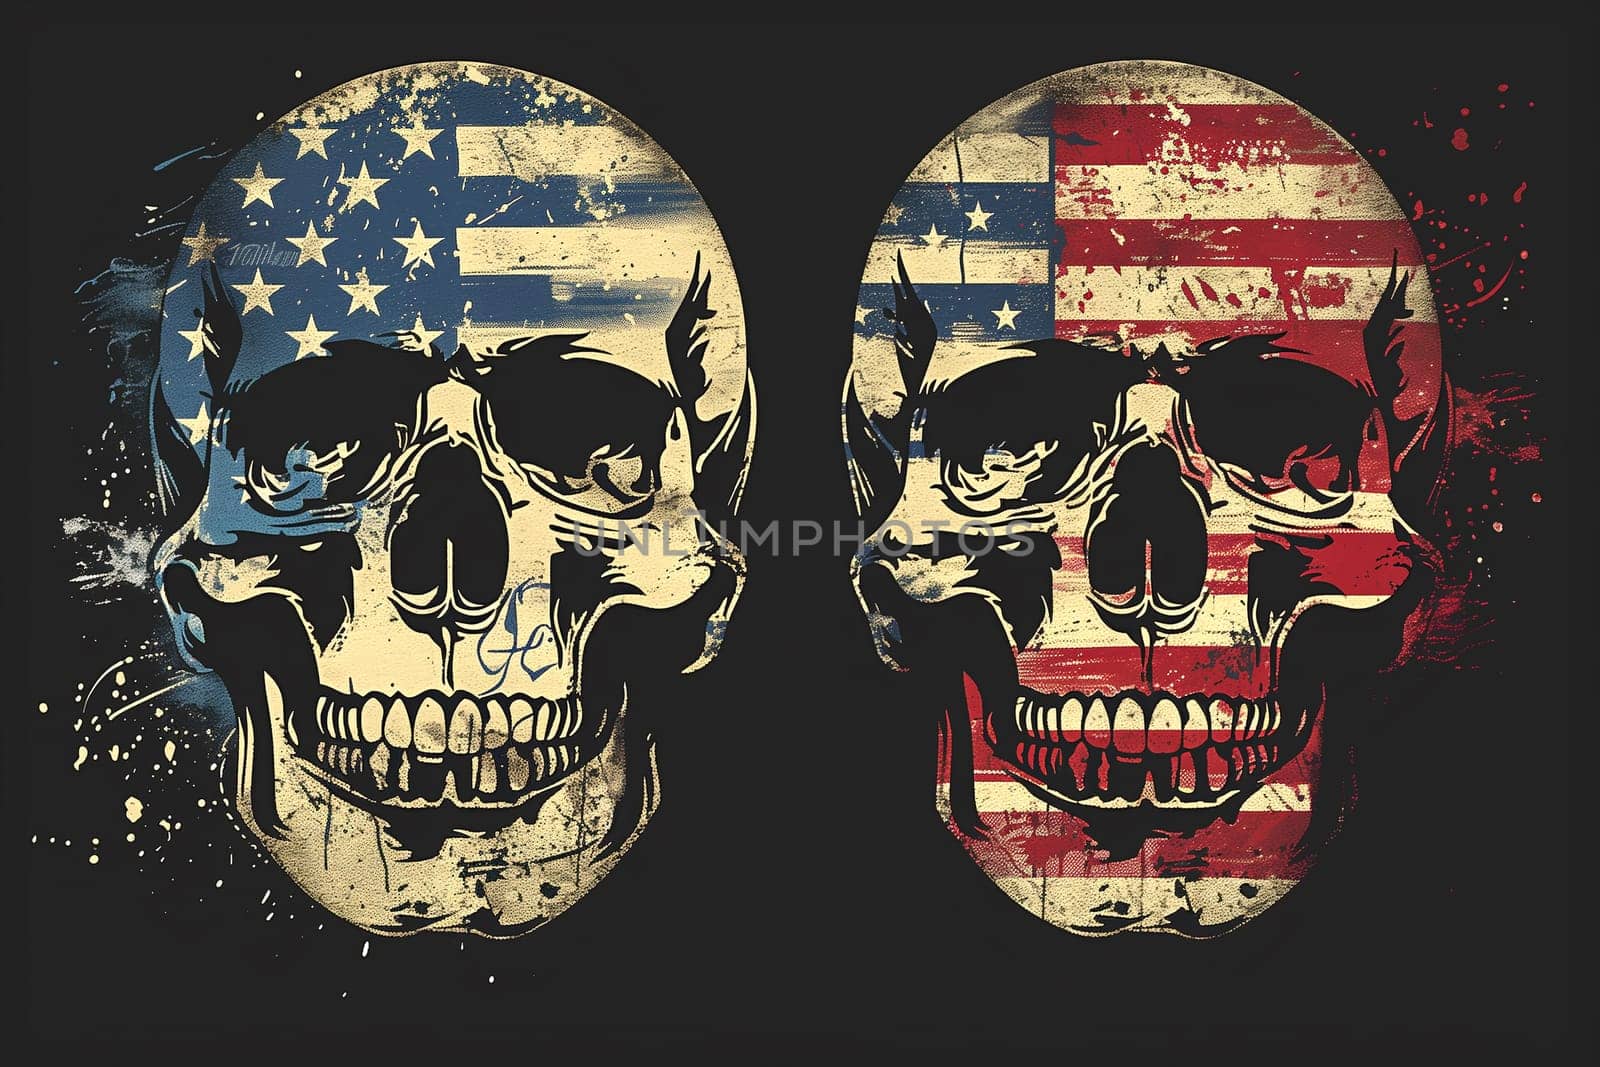 American Patriotic Skulls Representing Biker Culture on World Motorcycle Day by Sd28DimoN_1976